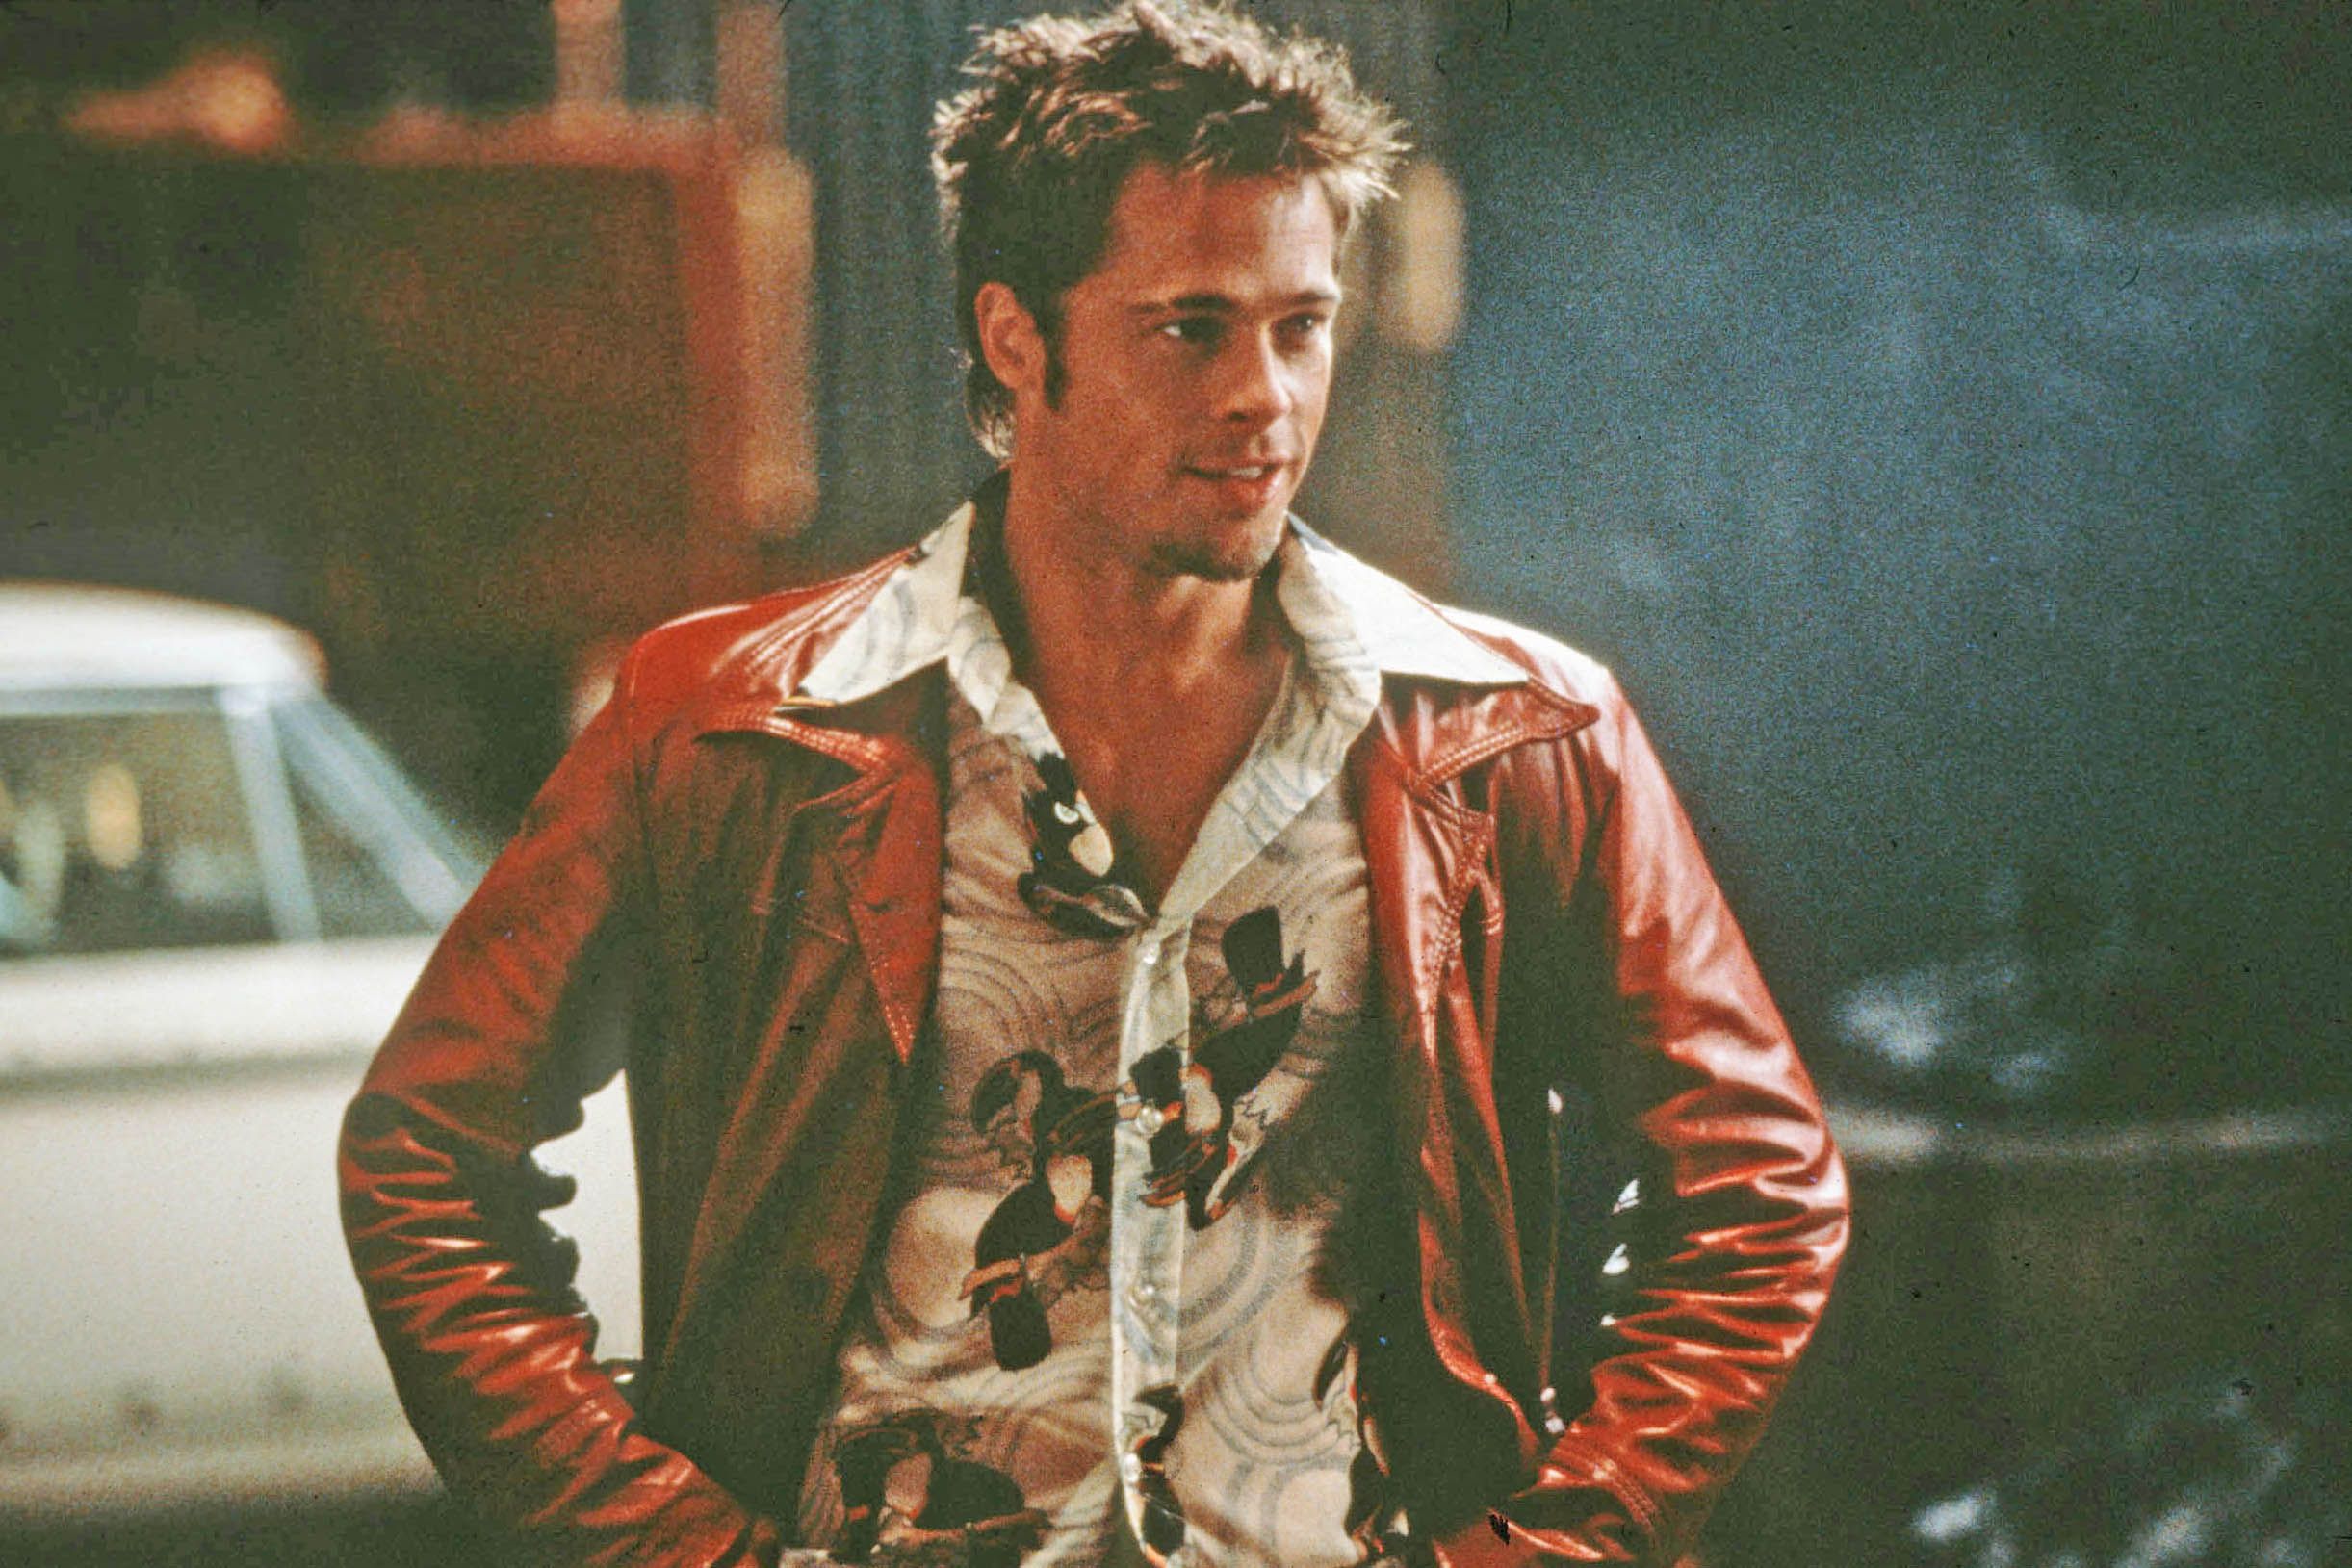 Fight Club Brad Pitt in red leather jacket faces Edward Norton 8x10 inch  photo - Moviemarket